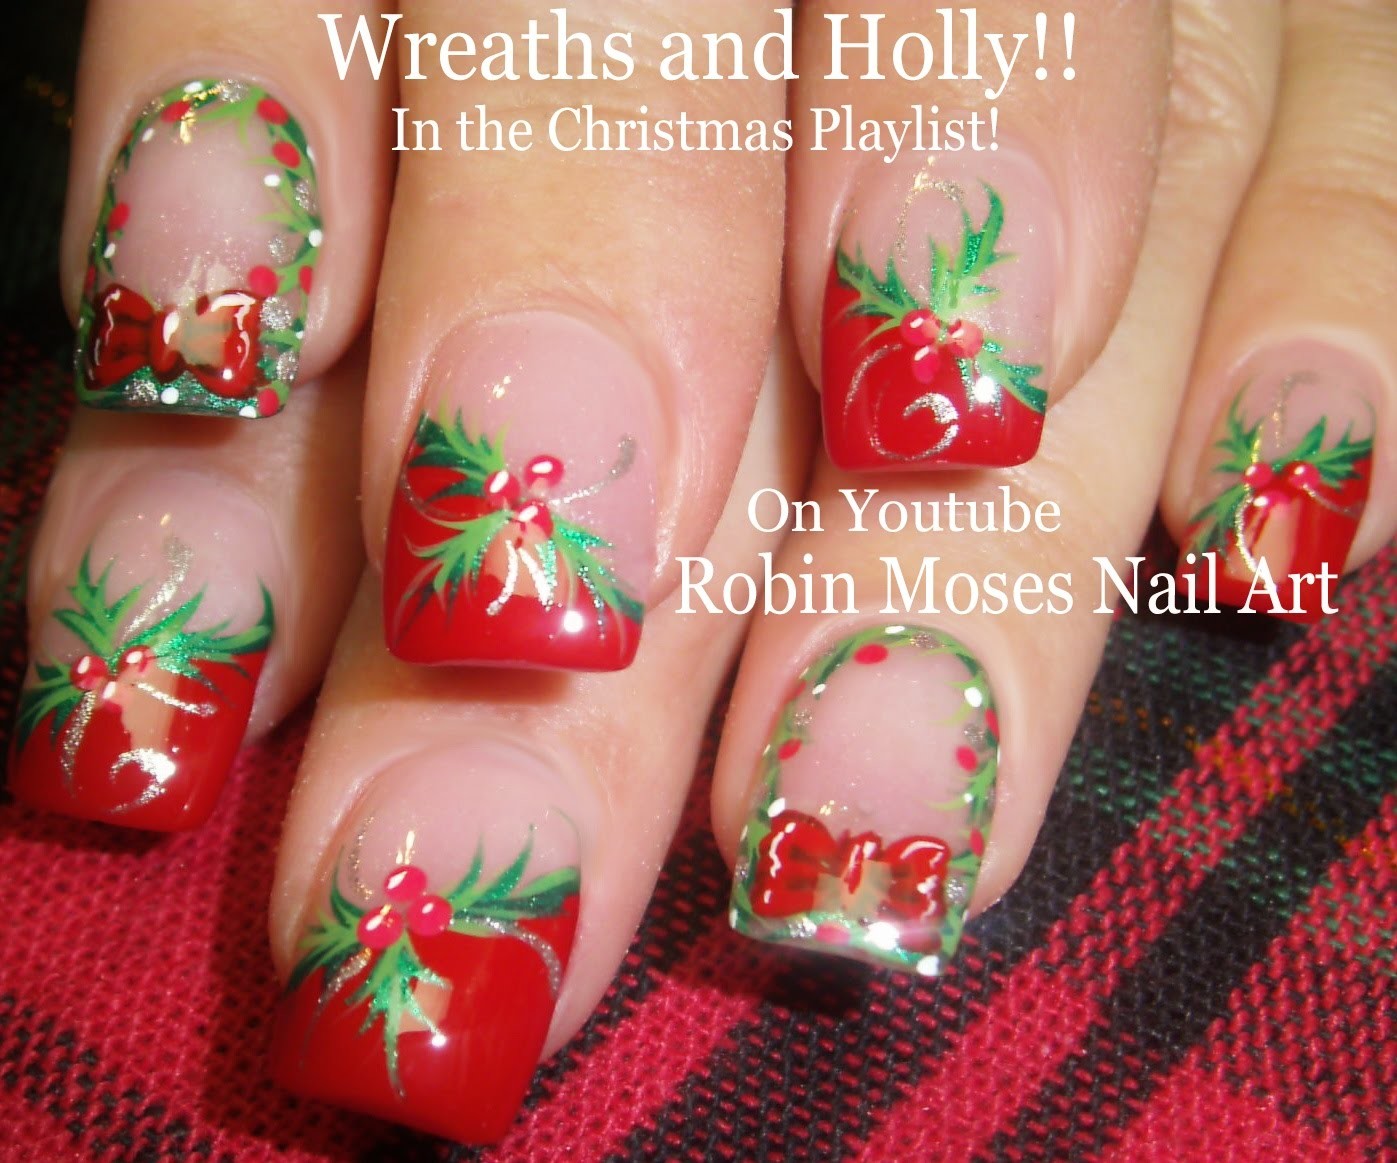 4. "Step-by-Step Christmas Present Nail Art Tutorial" - wide 2